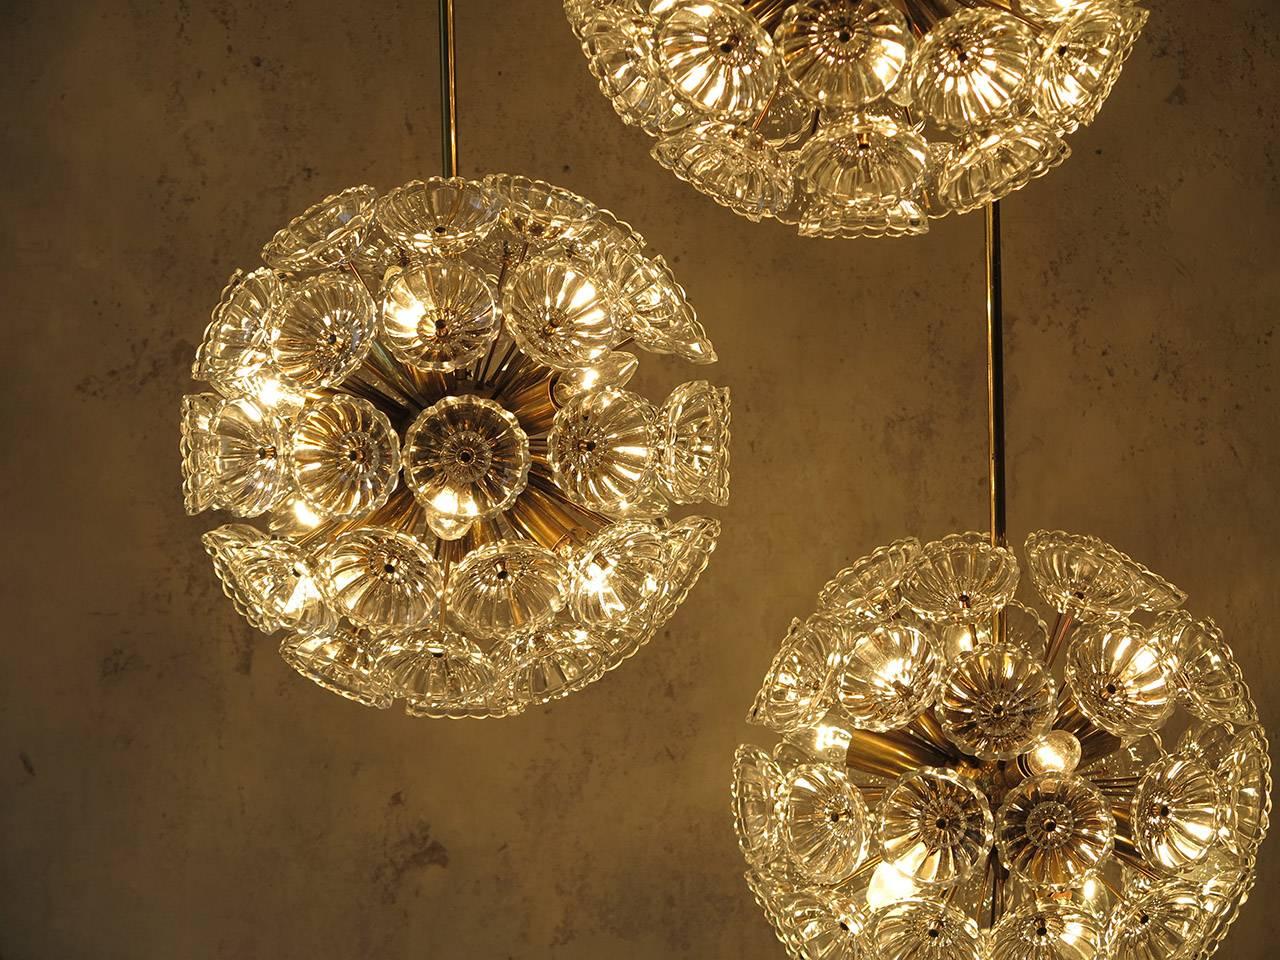 Eye-catching floral glass and brass chandeliers in the style of Emil Stejnar, manufactured in the 1960s in Germany.
Very heavy with glass flowers on a brass Sputnik frame. 
The glass pieces are beautifully cut with a fine eye for detail, all